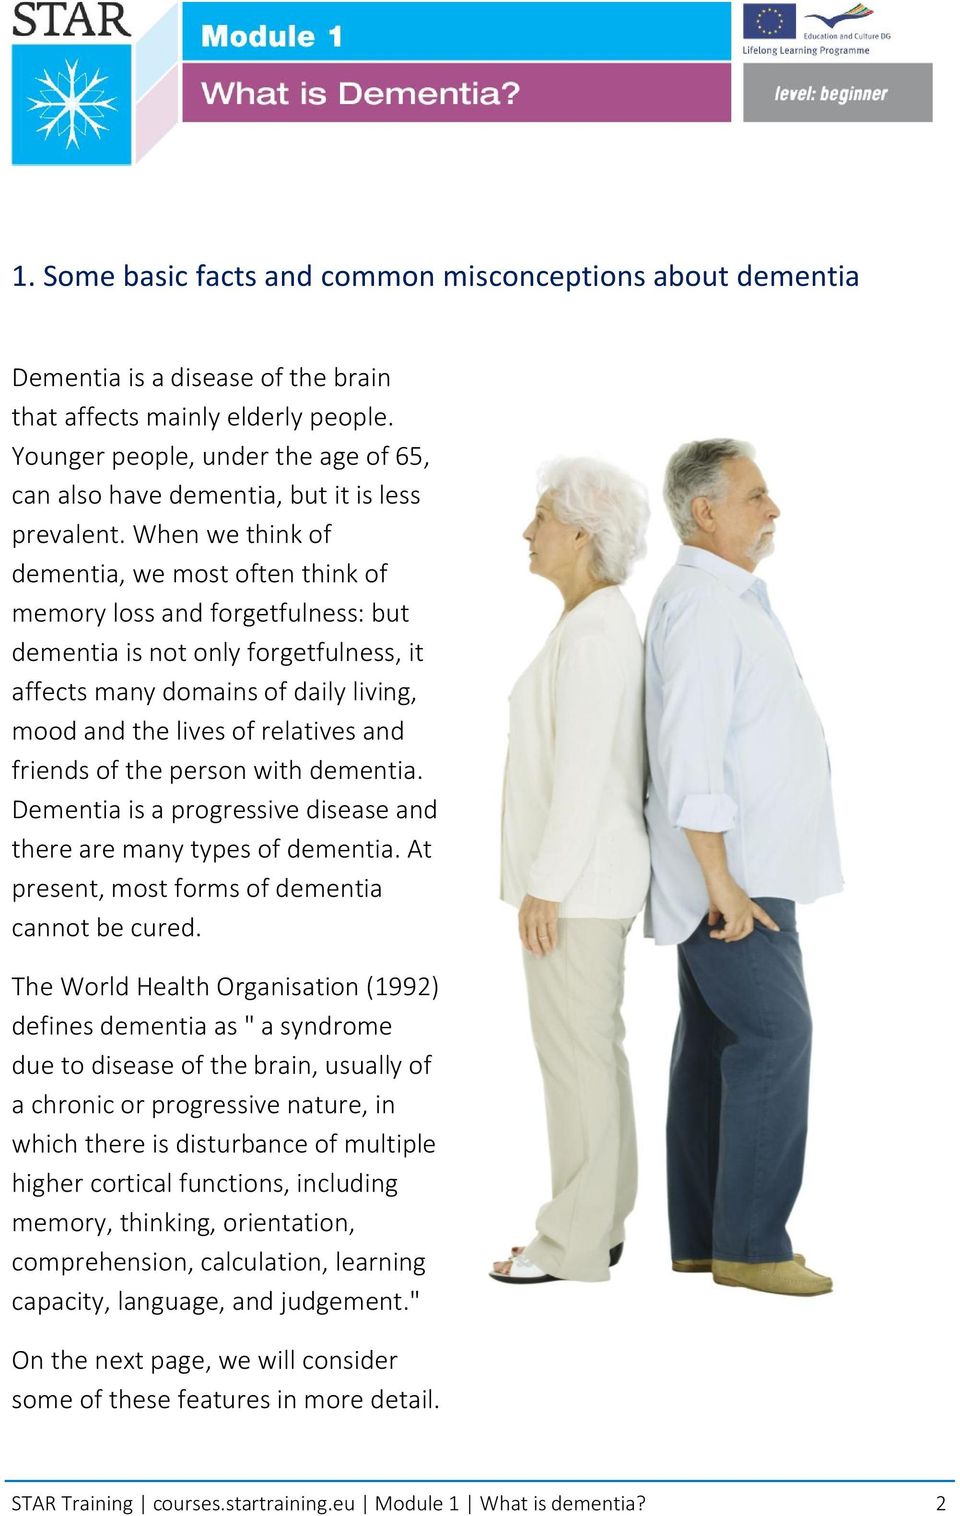 When we think of dementia, we most often think of memory loss and forgetfulness: but dementia is not only forgetfulness, it affects many domains of daily living, mood and the lives of relatives and